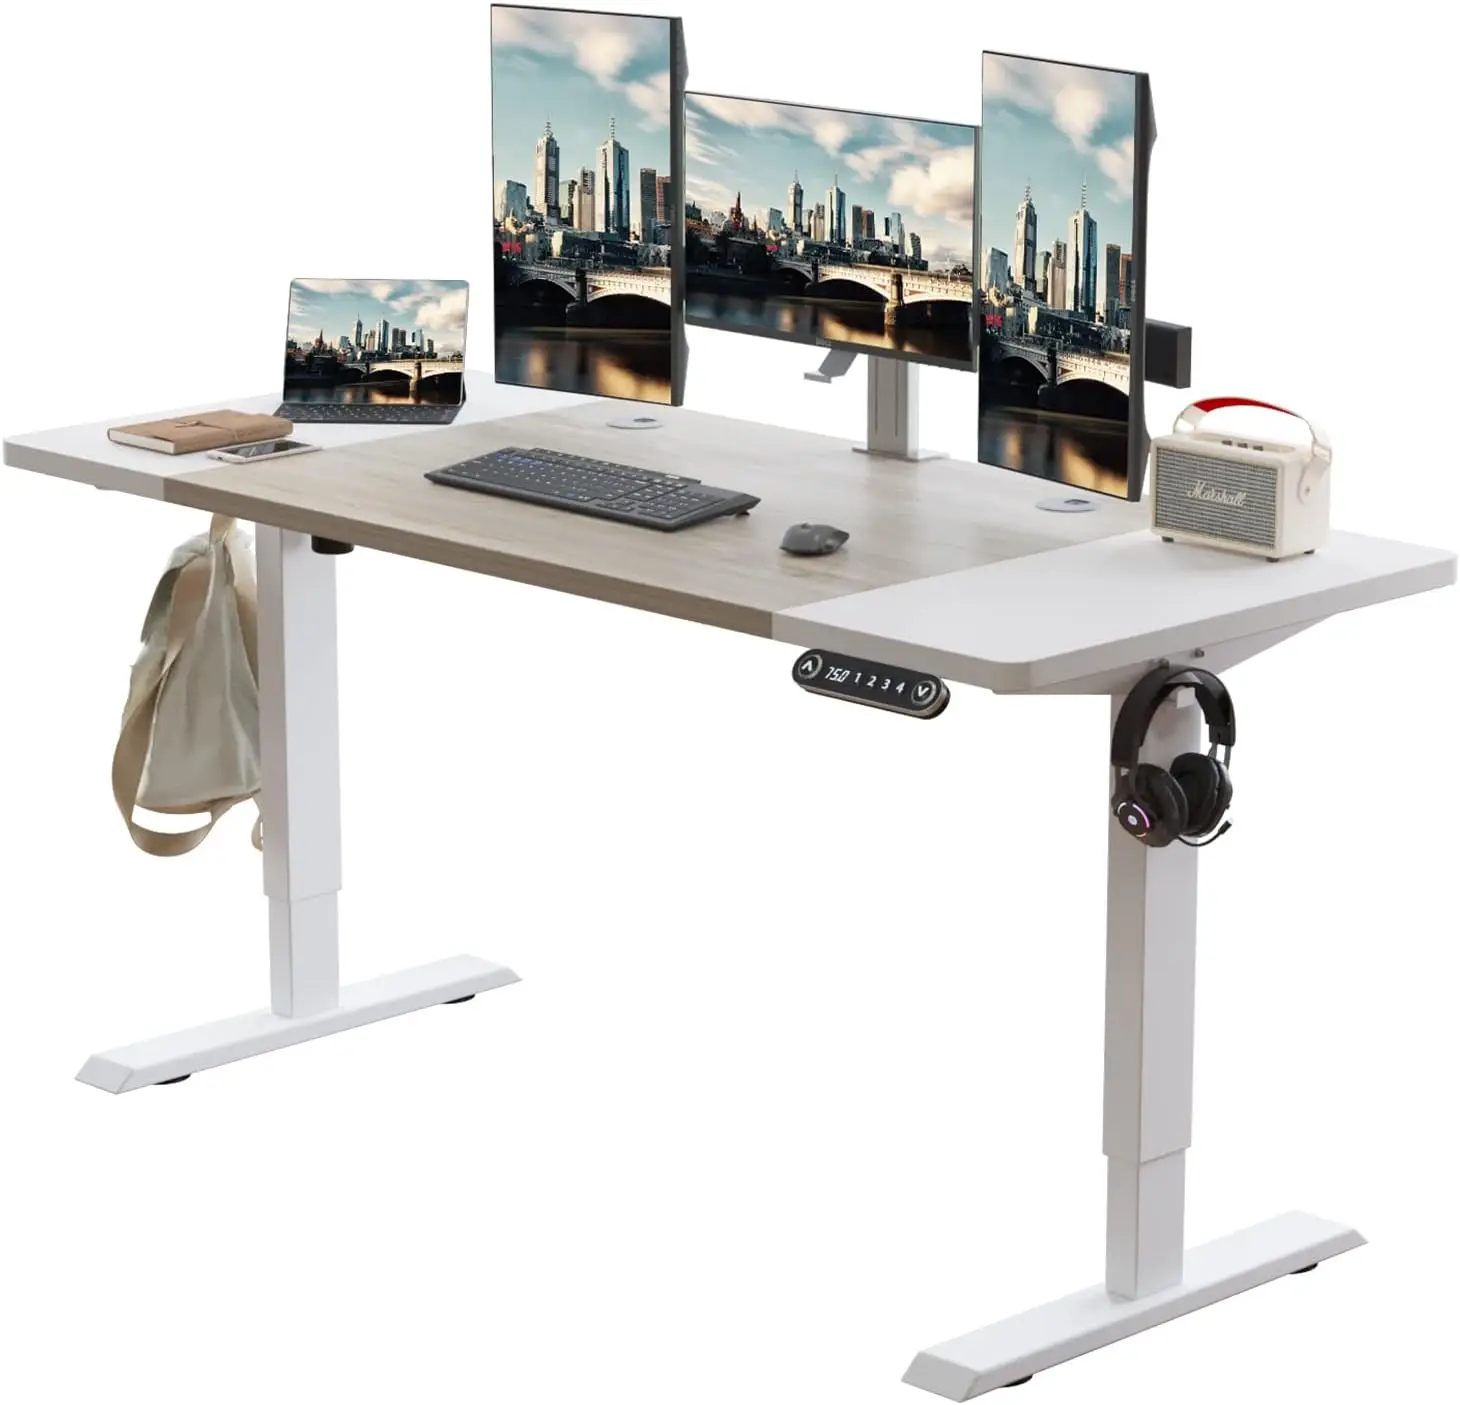 

Electric Height Adjustable Standing Desk, 63x 30 Inches Stand Up Desk Workstation, Splice Board Home Office Computer Sta